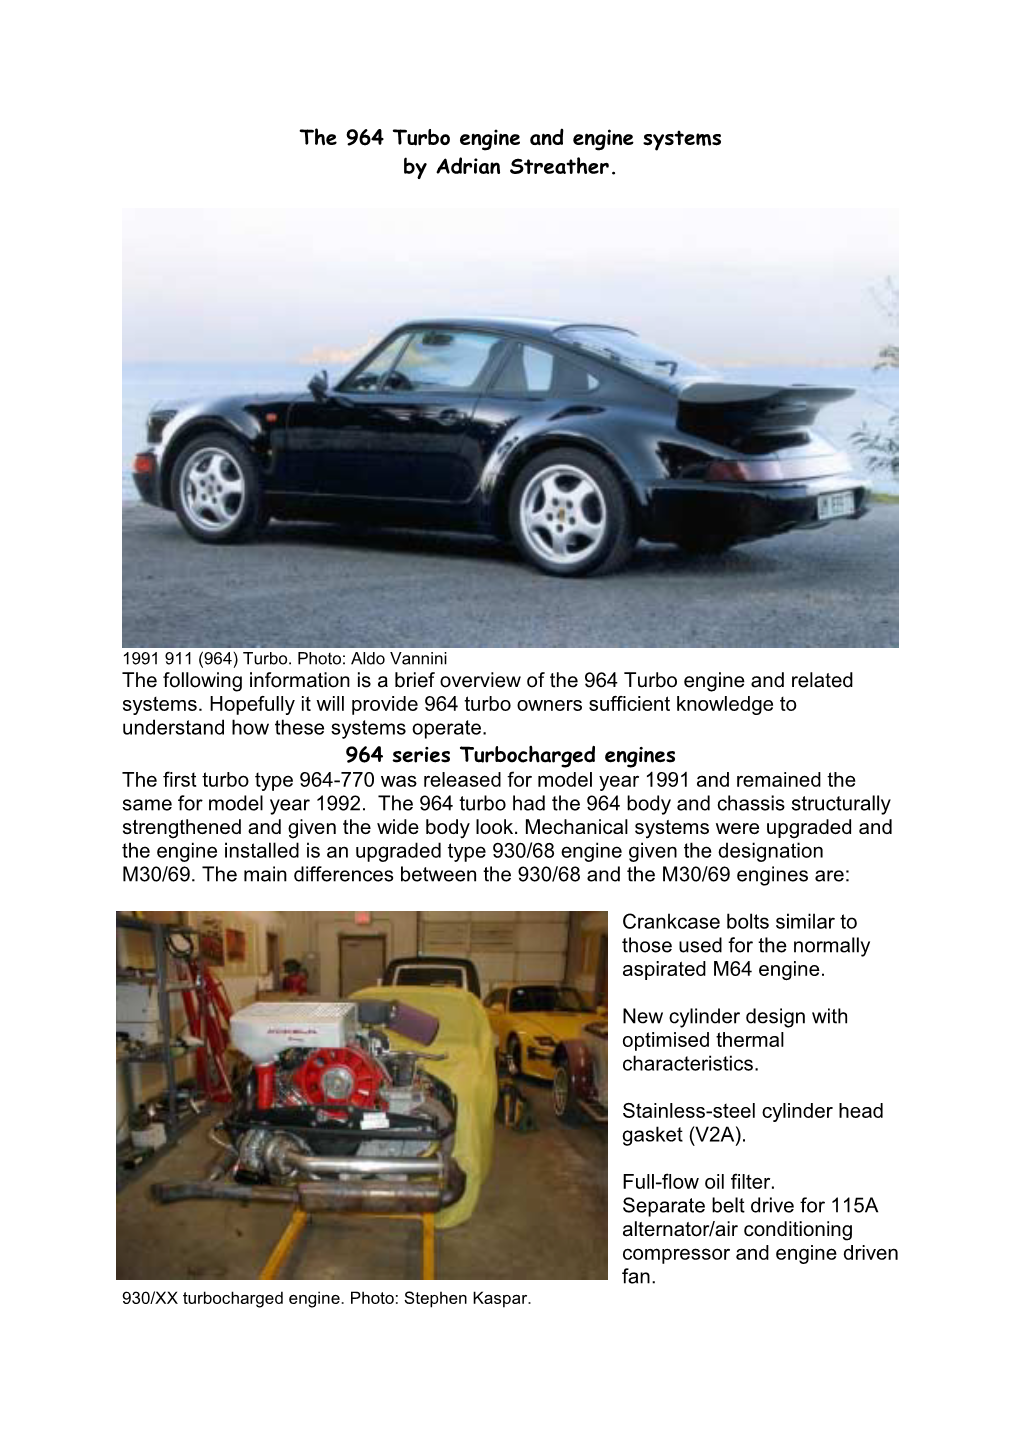 The 964 Turbo Engine and Engine Systems Overview